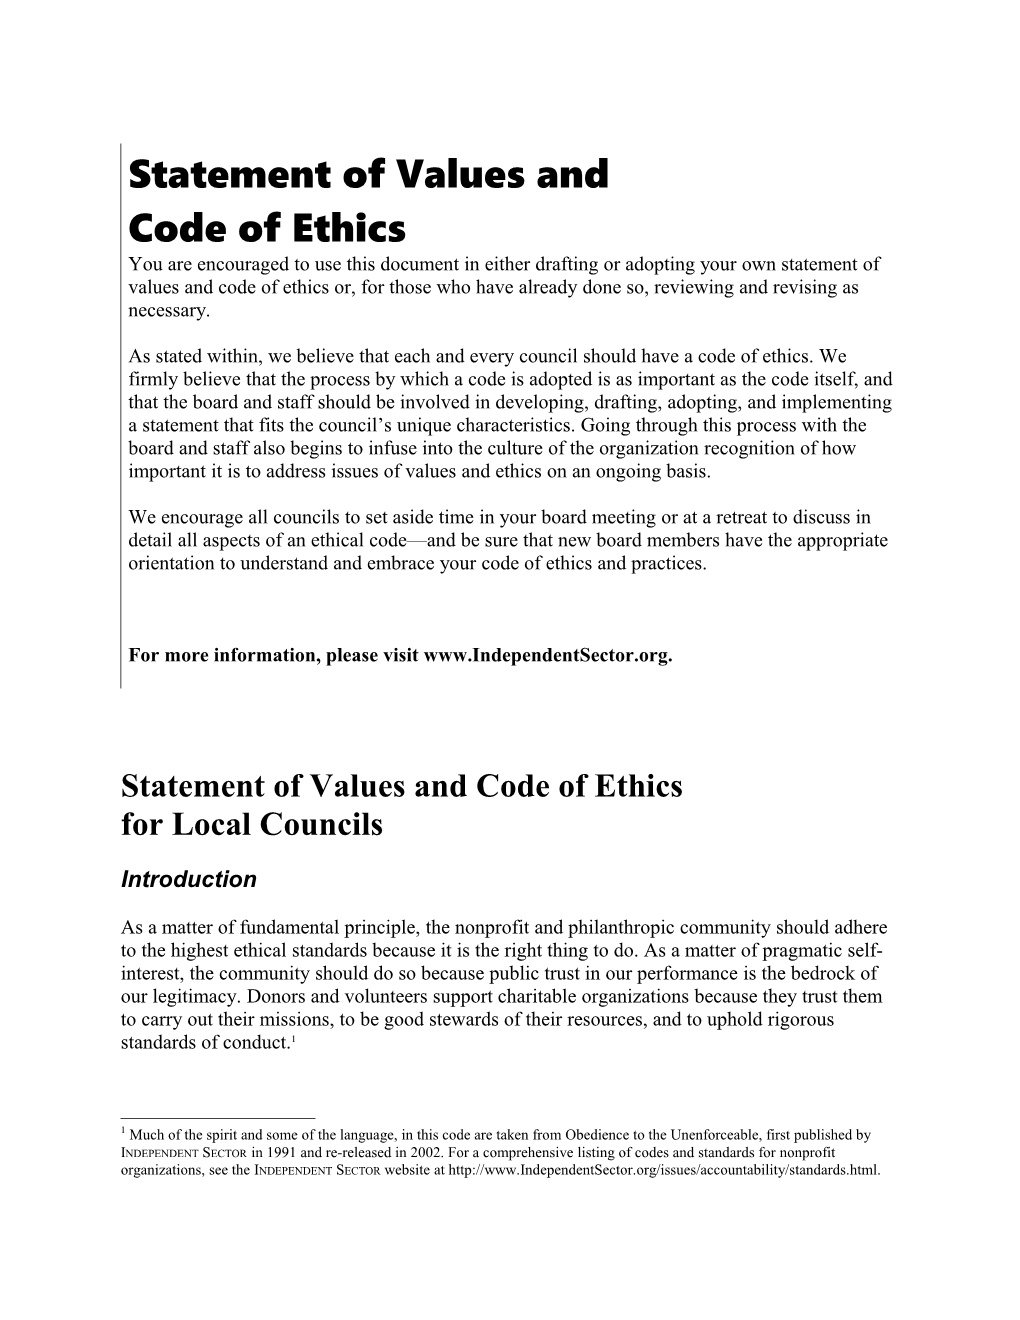 This Document Was Drafted by a Special Taskforce of the INDEPENDENT SECTOR Ethics And